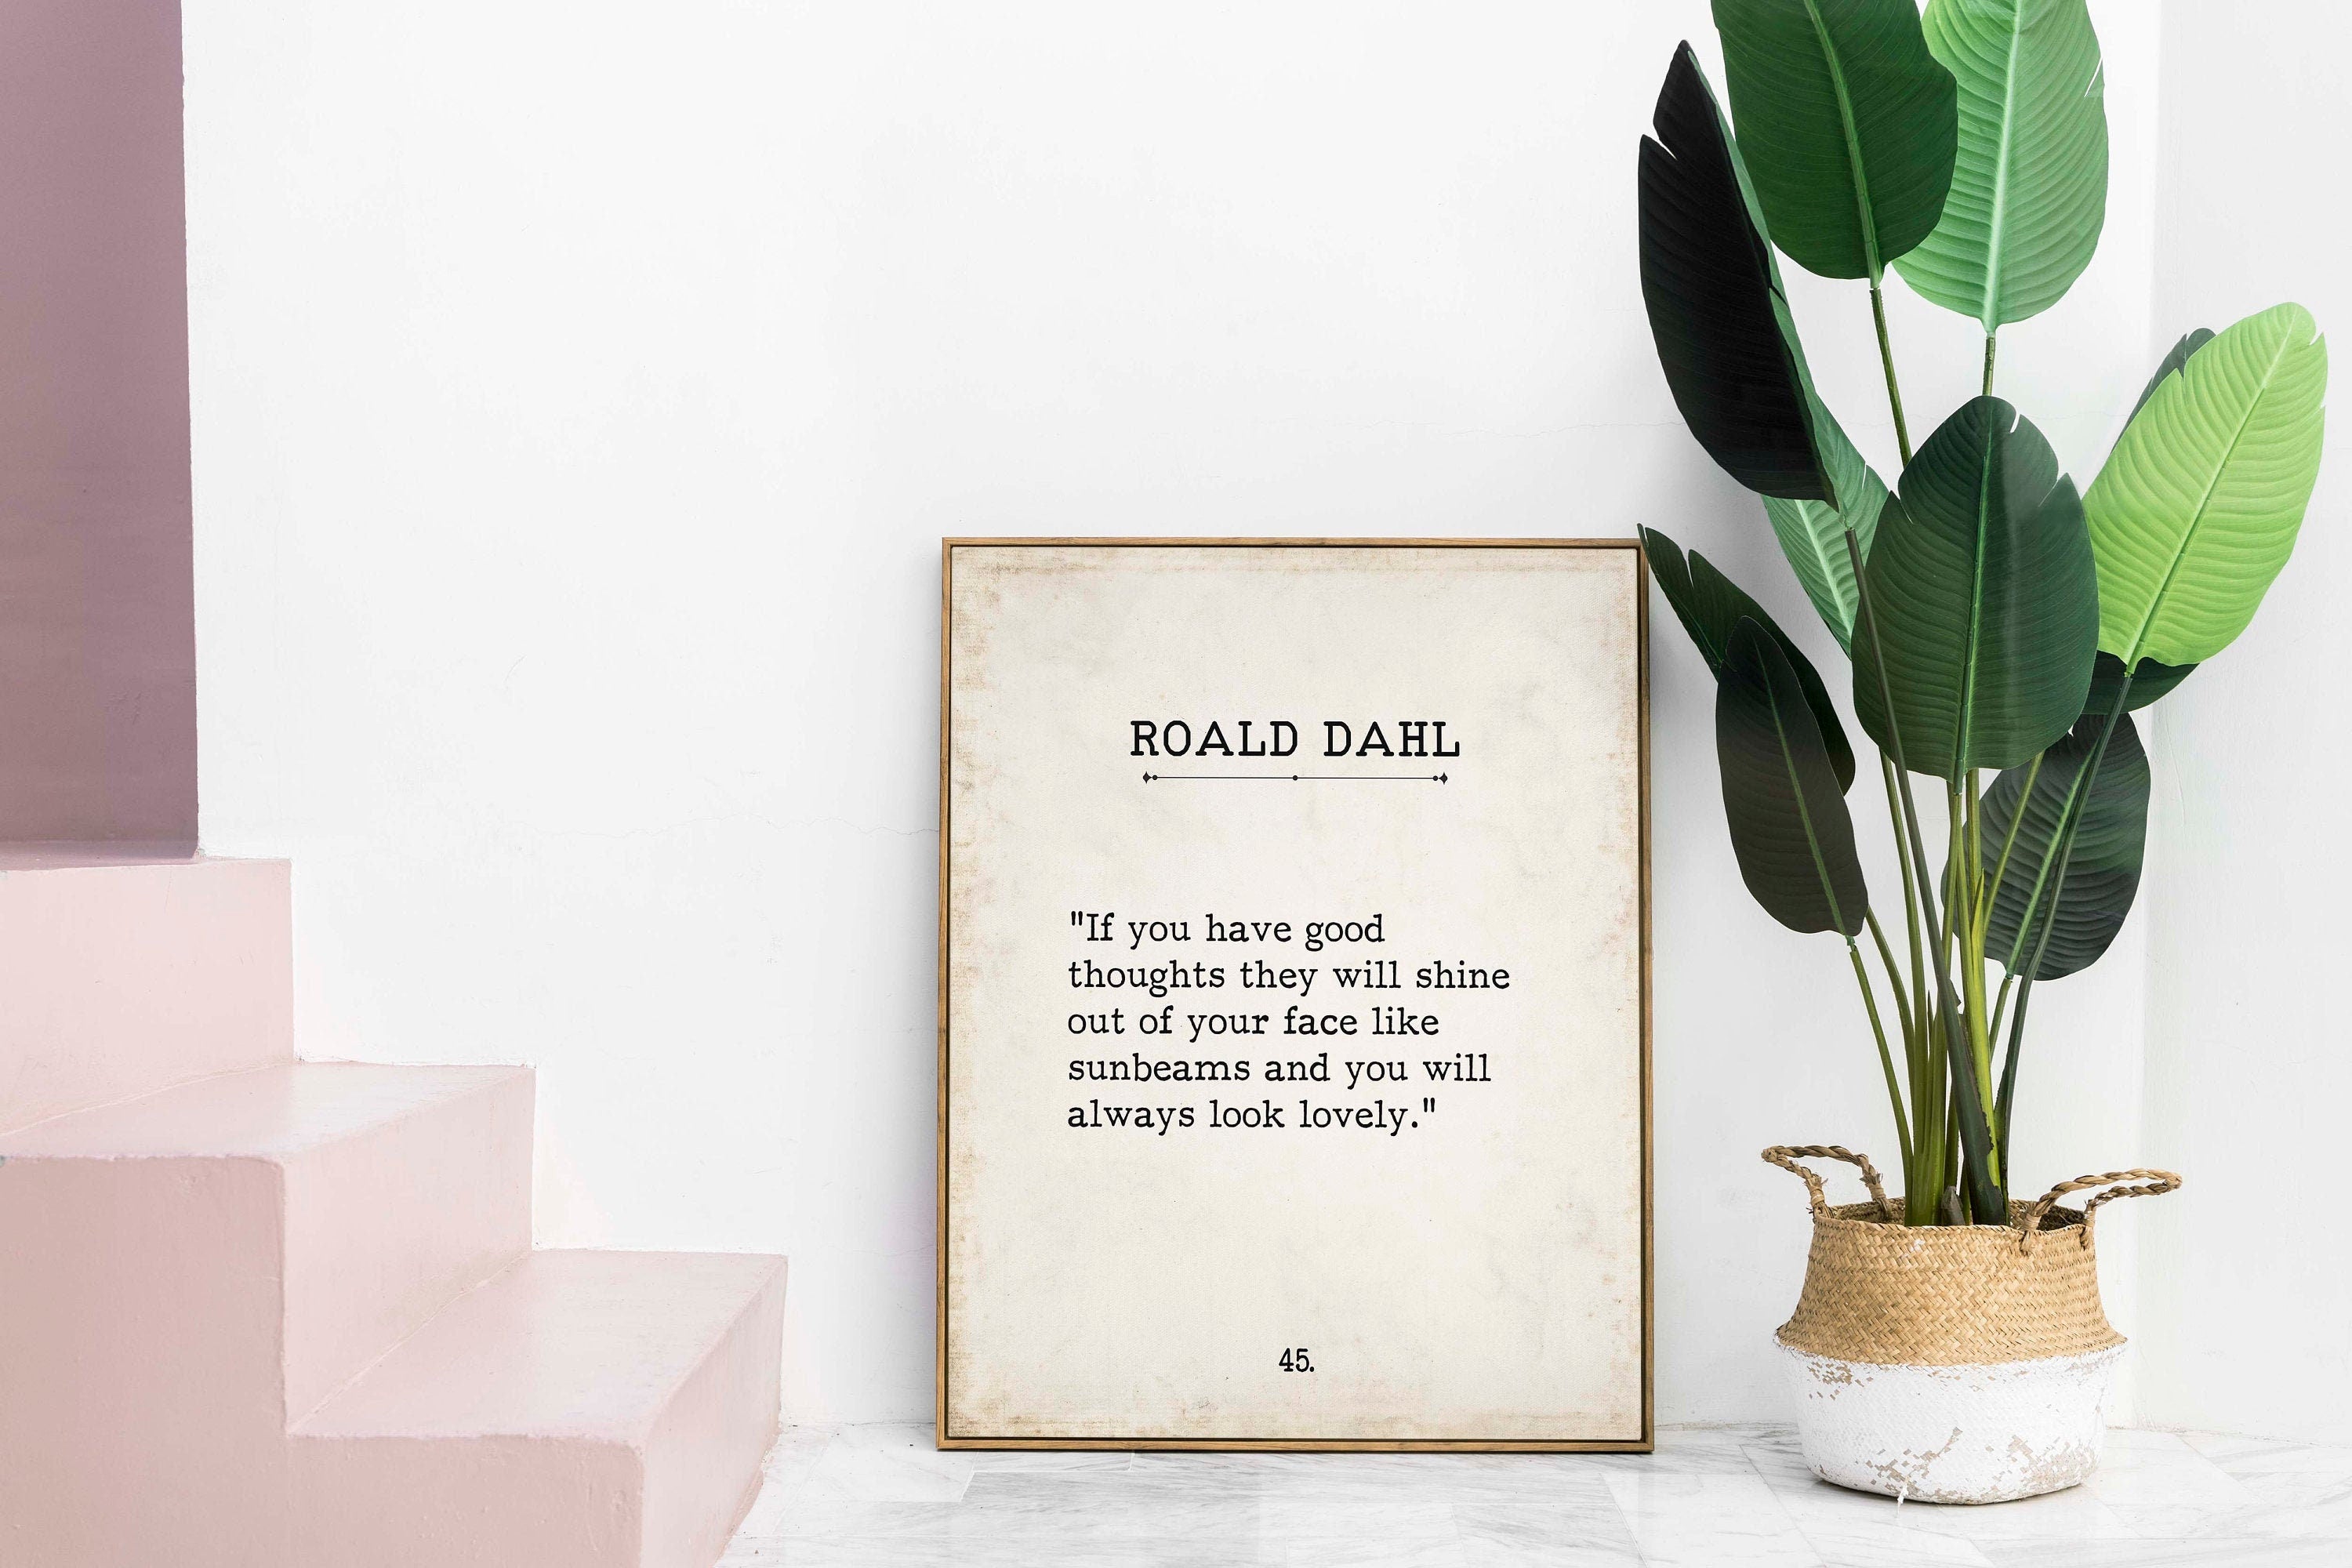 Roald Dahl Book Page Inspirational Wall Art, If You Have Good Thoughts Quote Vintage Style Print for Living Room or Bedroom Wall Decor